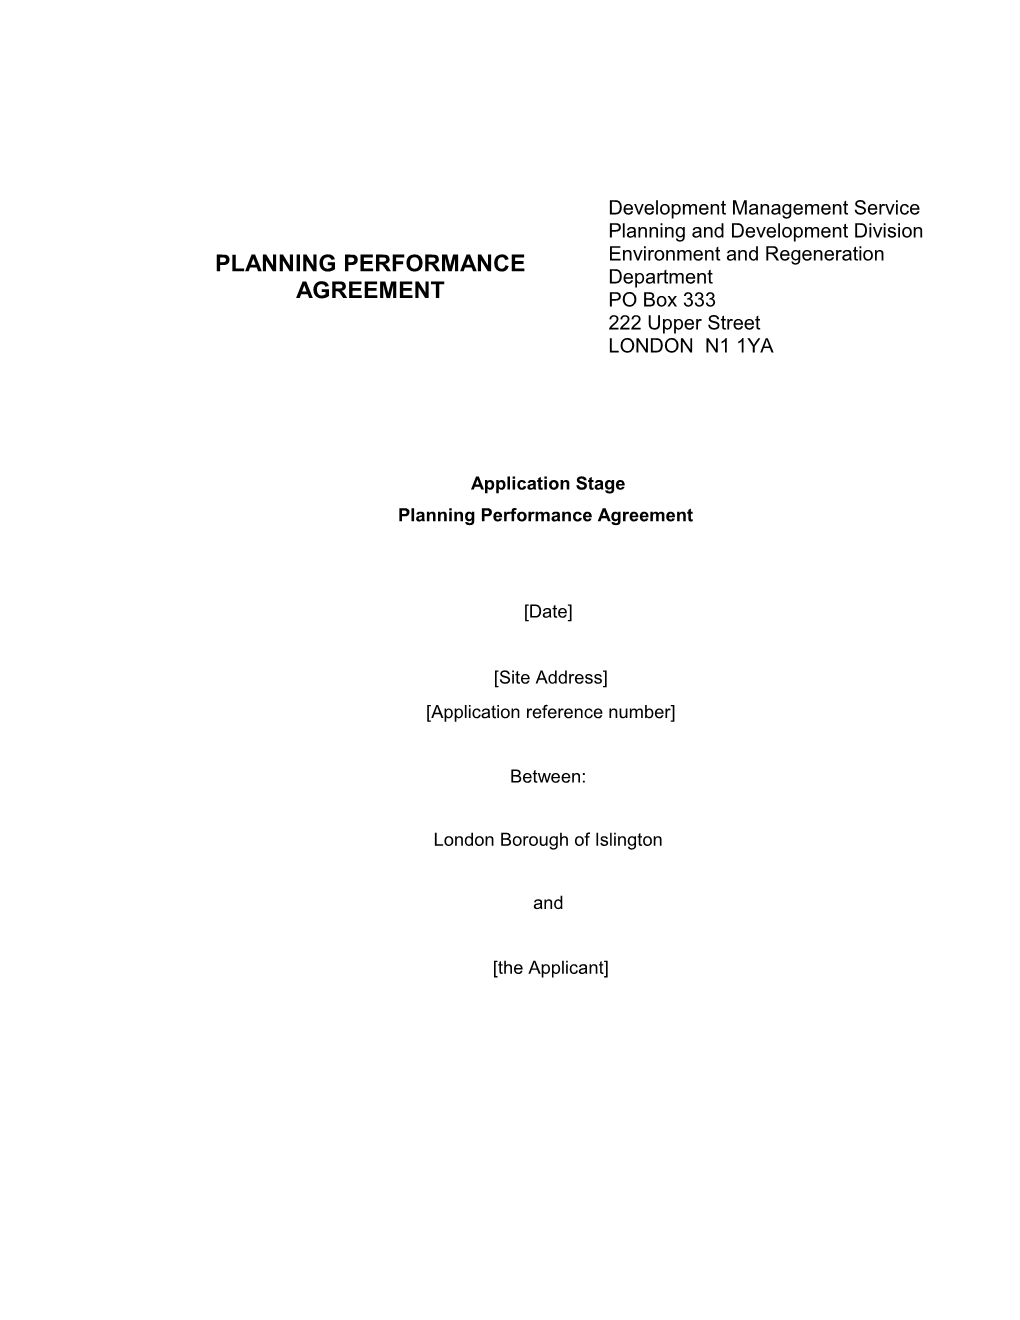 Template Application Stage Planning Performance Agreement (April 2017)